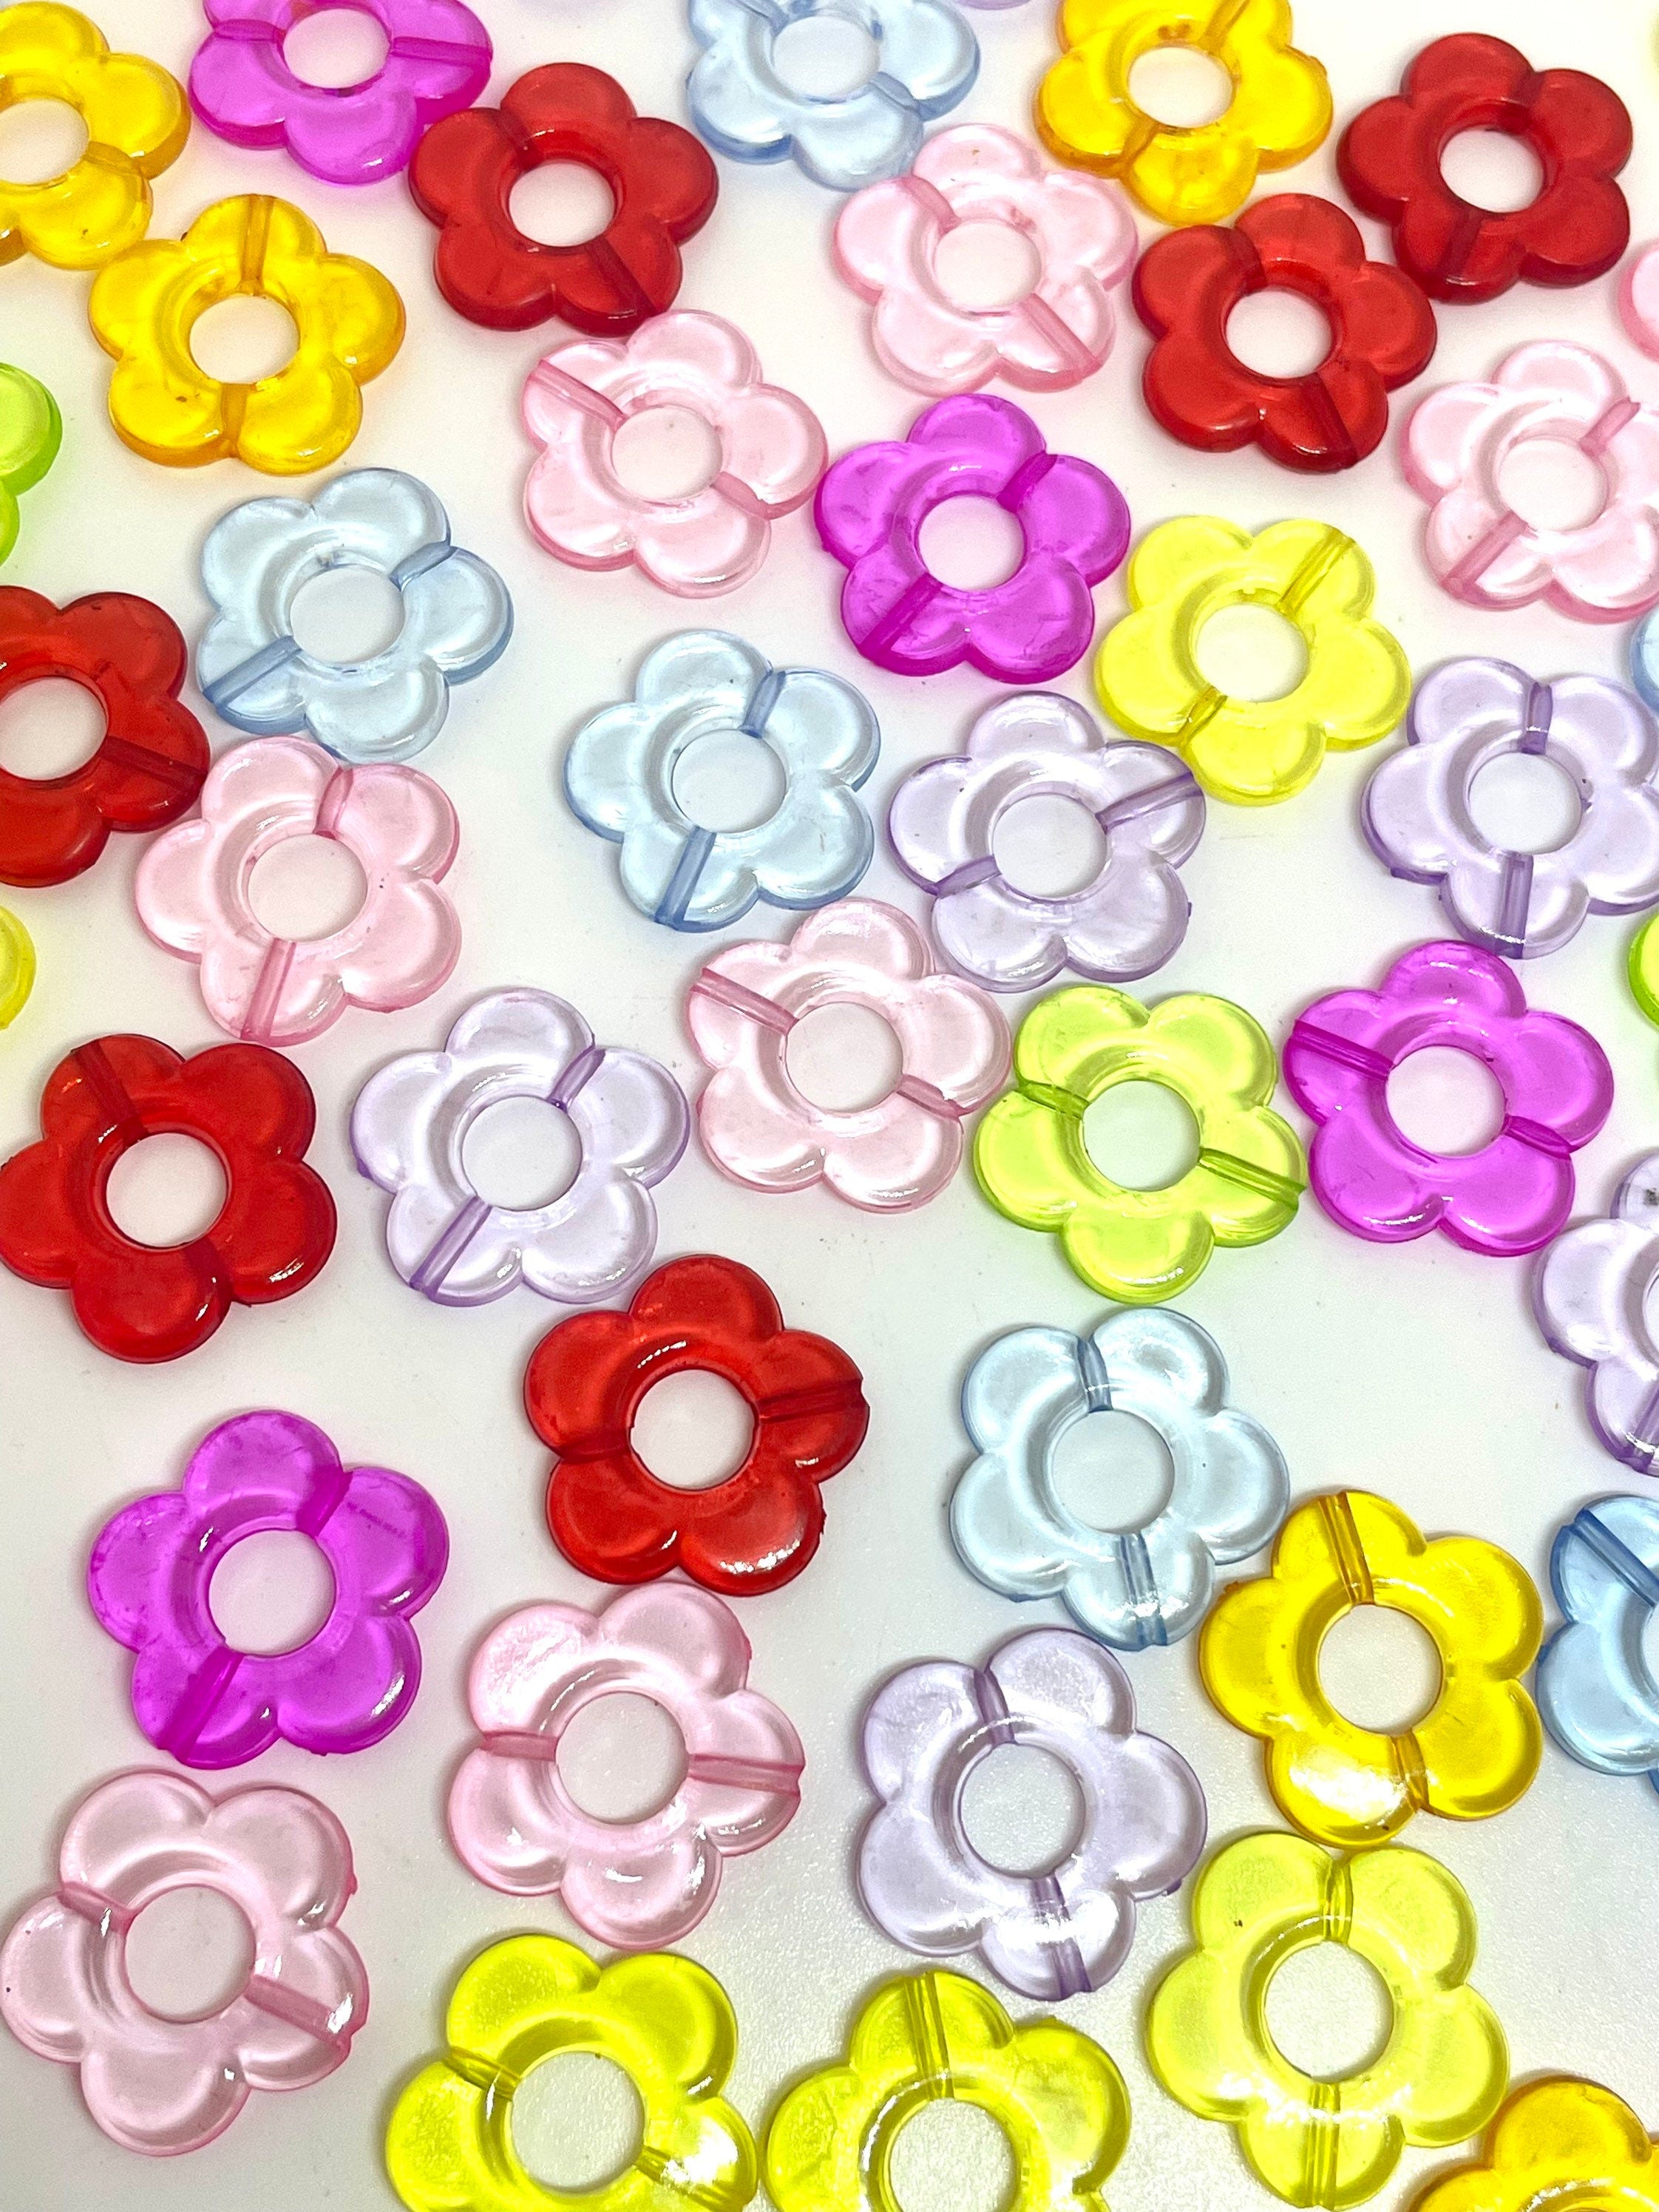 Translucent Flower Beads, Clear Beads for Jewelry Making, Choker